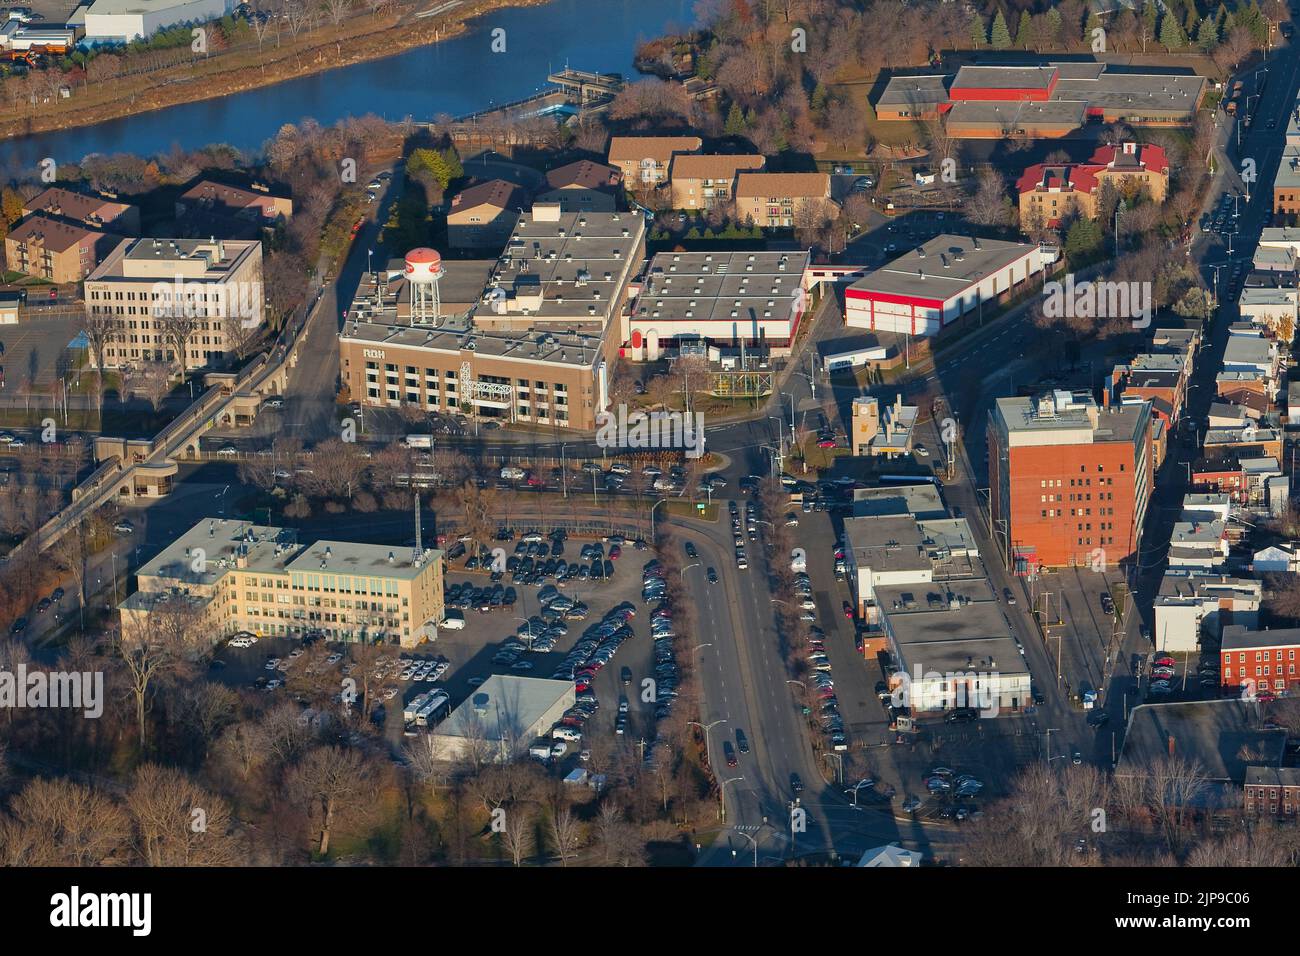 RBH (Rothmans, Benson & Hedges) plant (locally know as Rock city) in Quebec city is pictured in this aerial photo November 11, 2009.  Rothmans, Benson & Hedges (RBH) is Canada's second largest tobacco company, with 16.4% of the Canadian cigarette market. Stock Photo